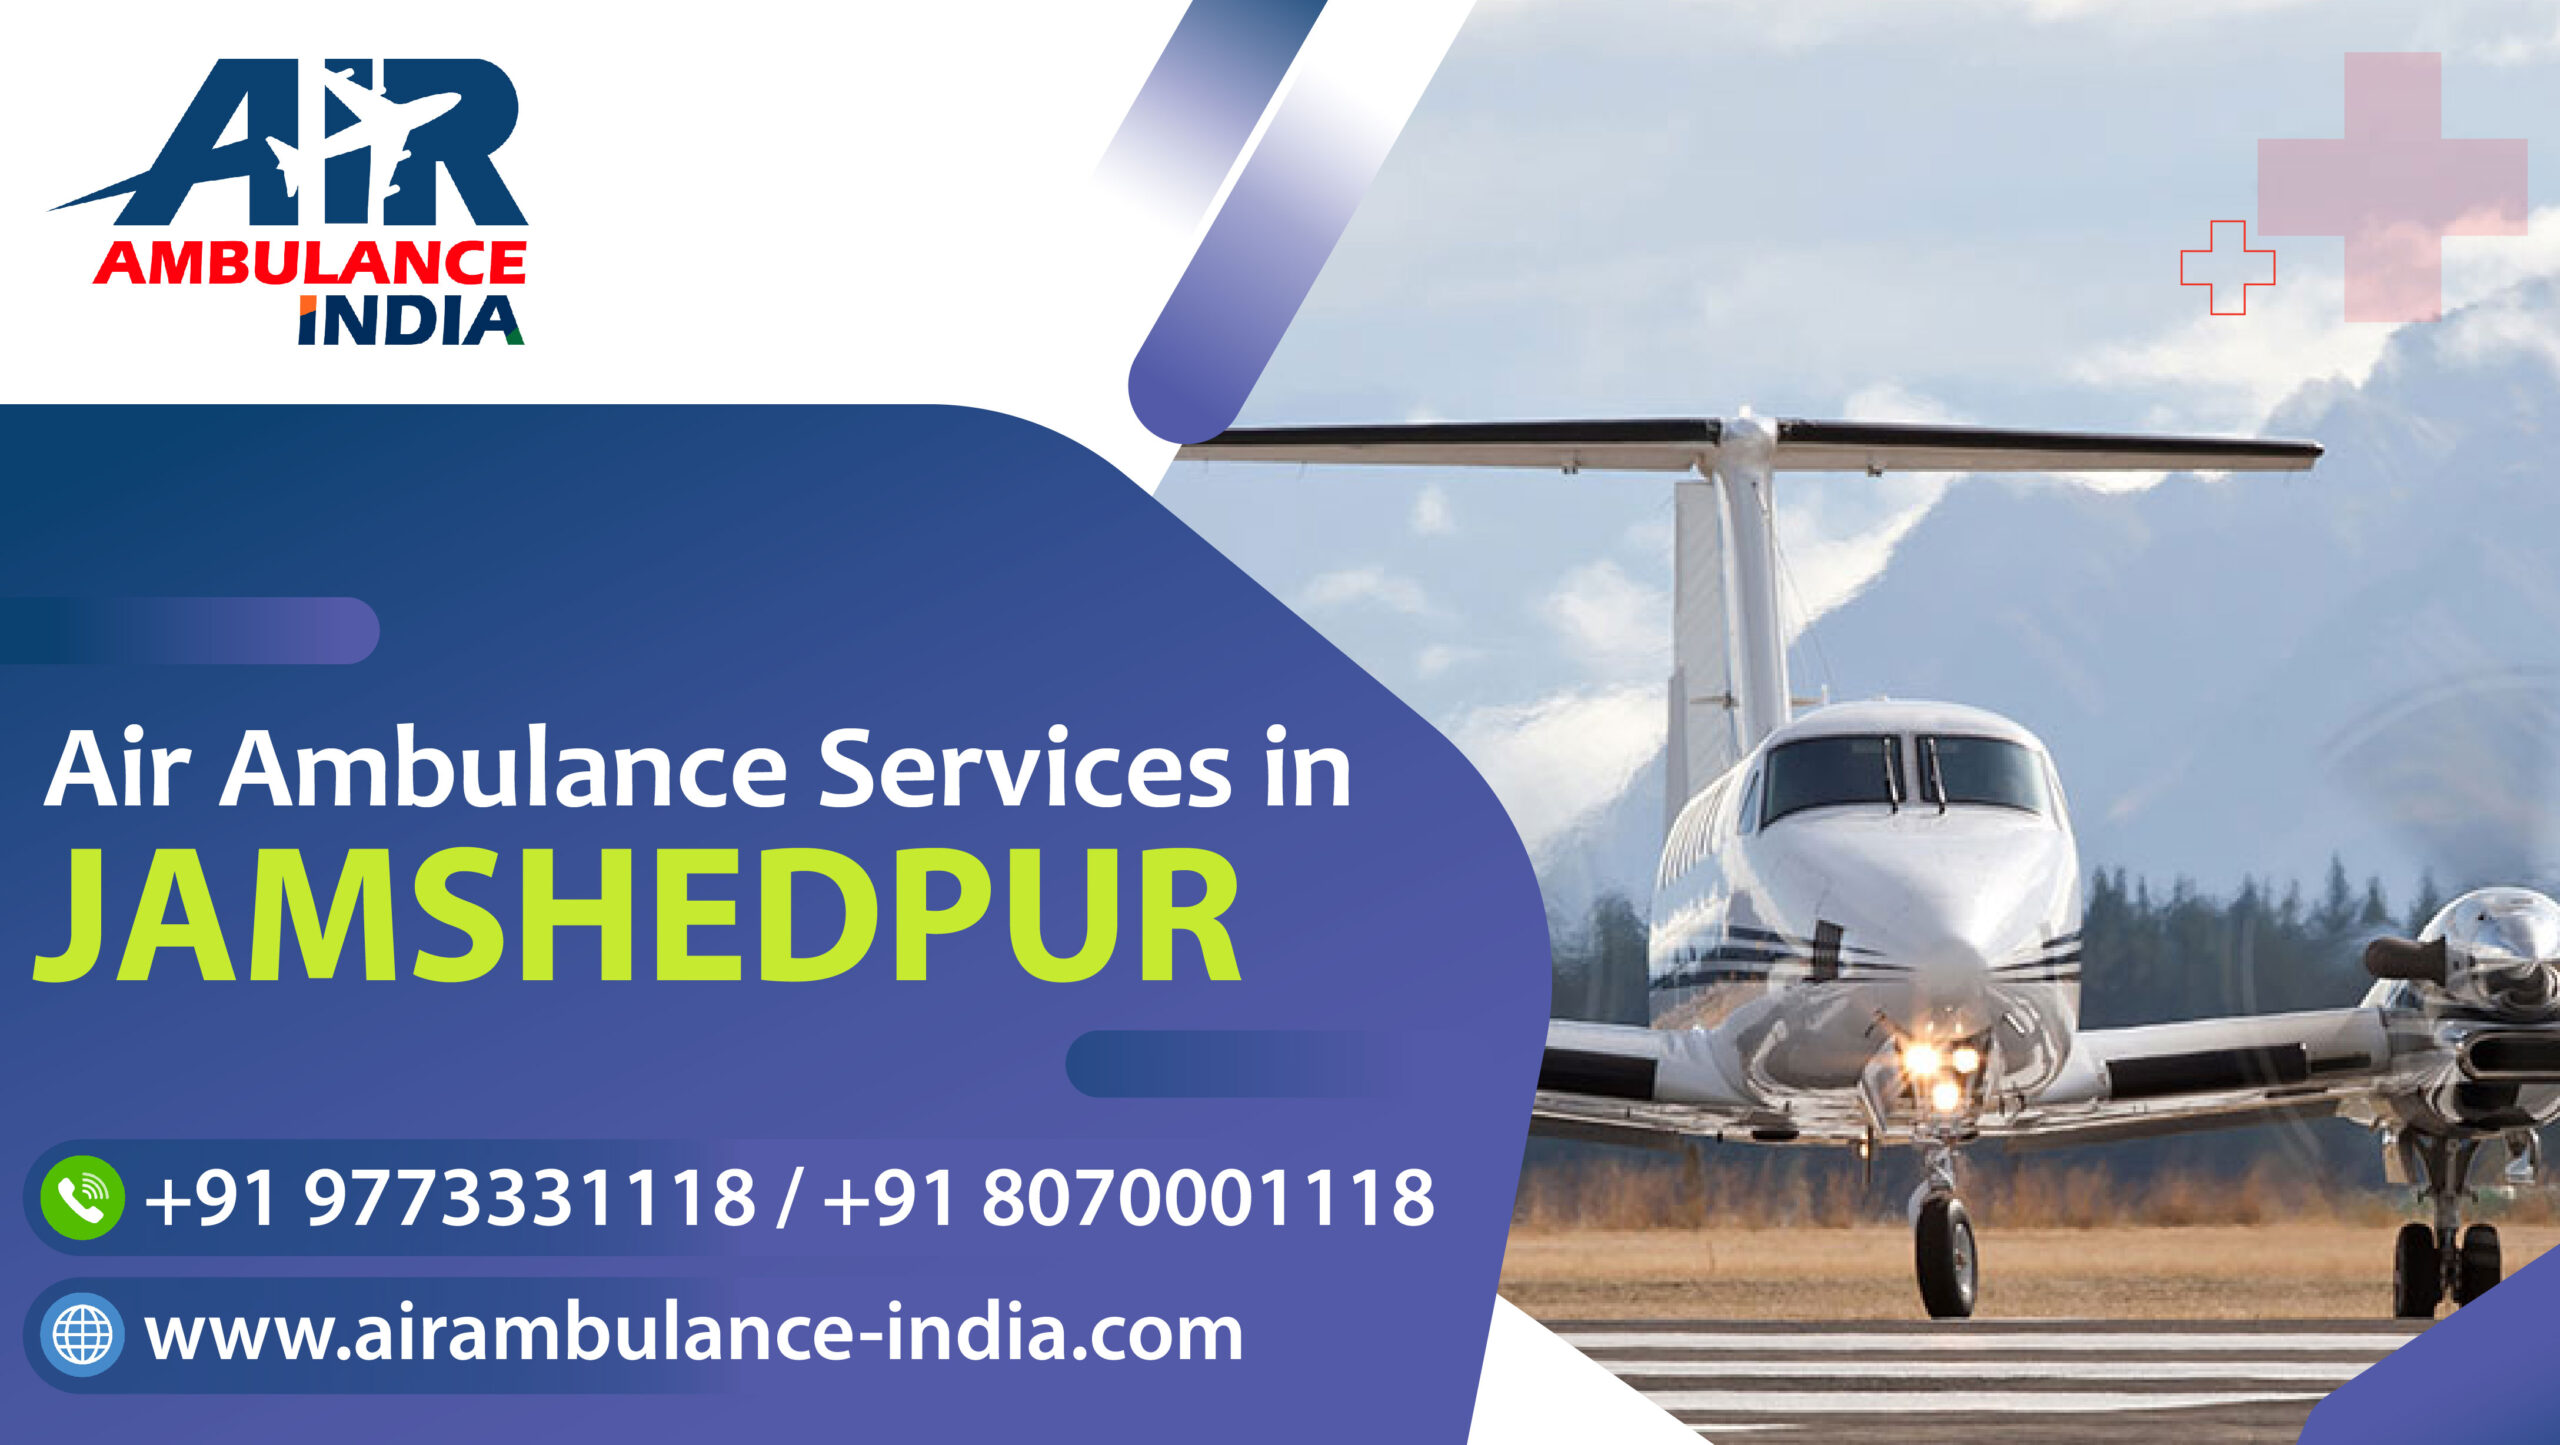 Air Ambulance Services in Jamshedpur